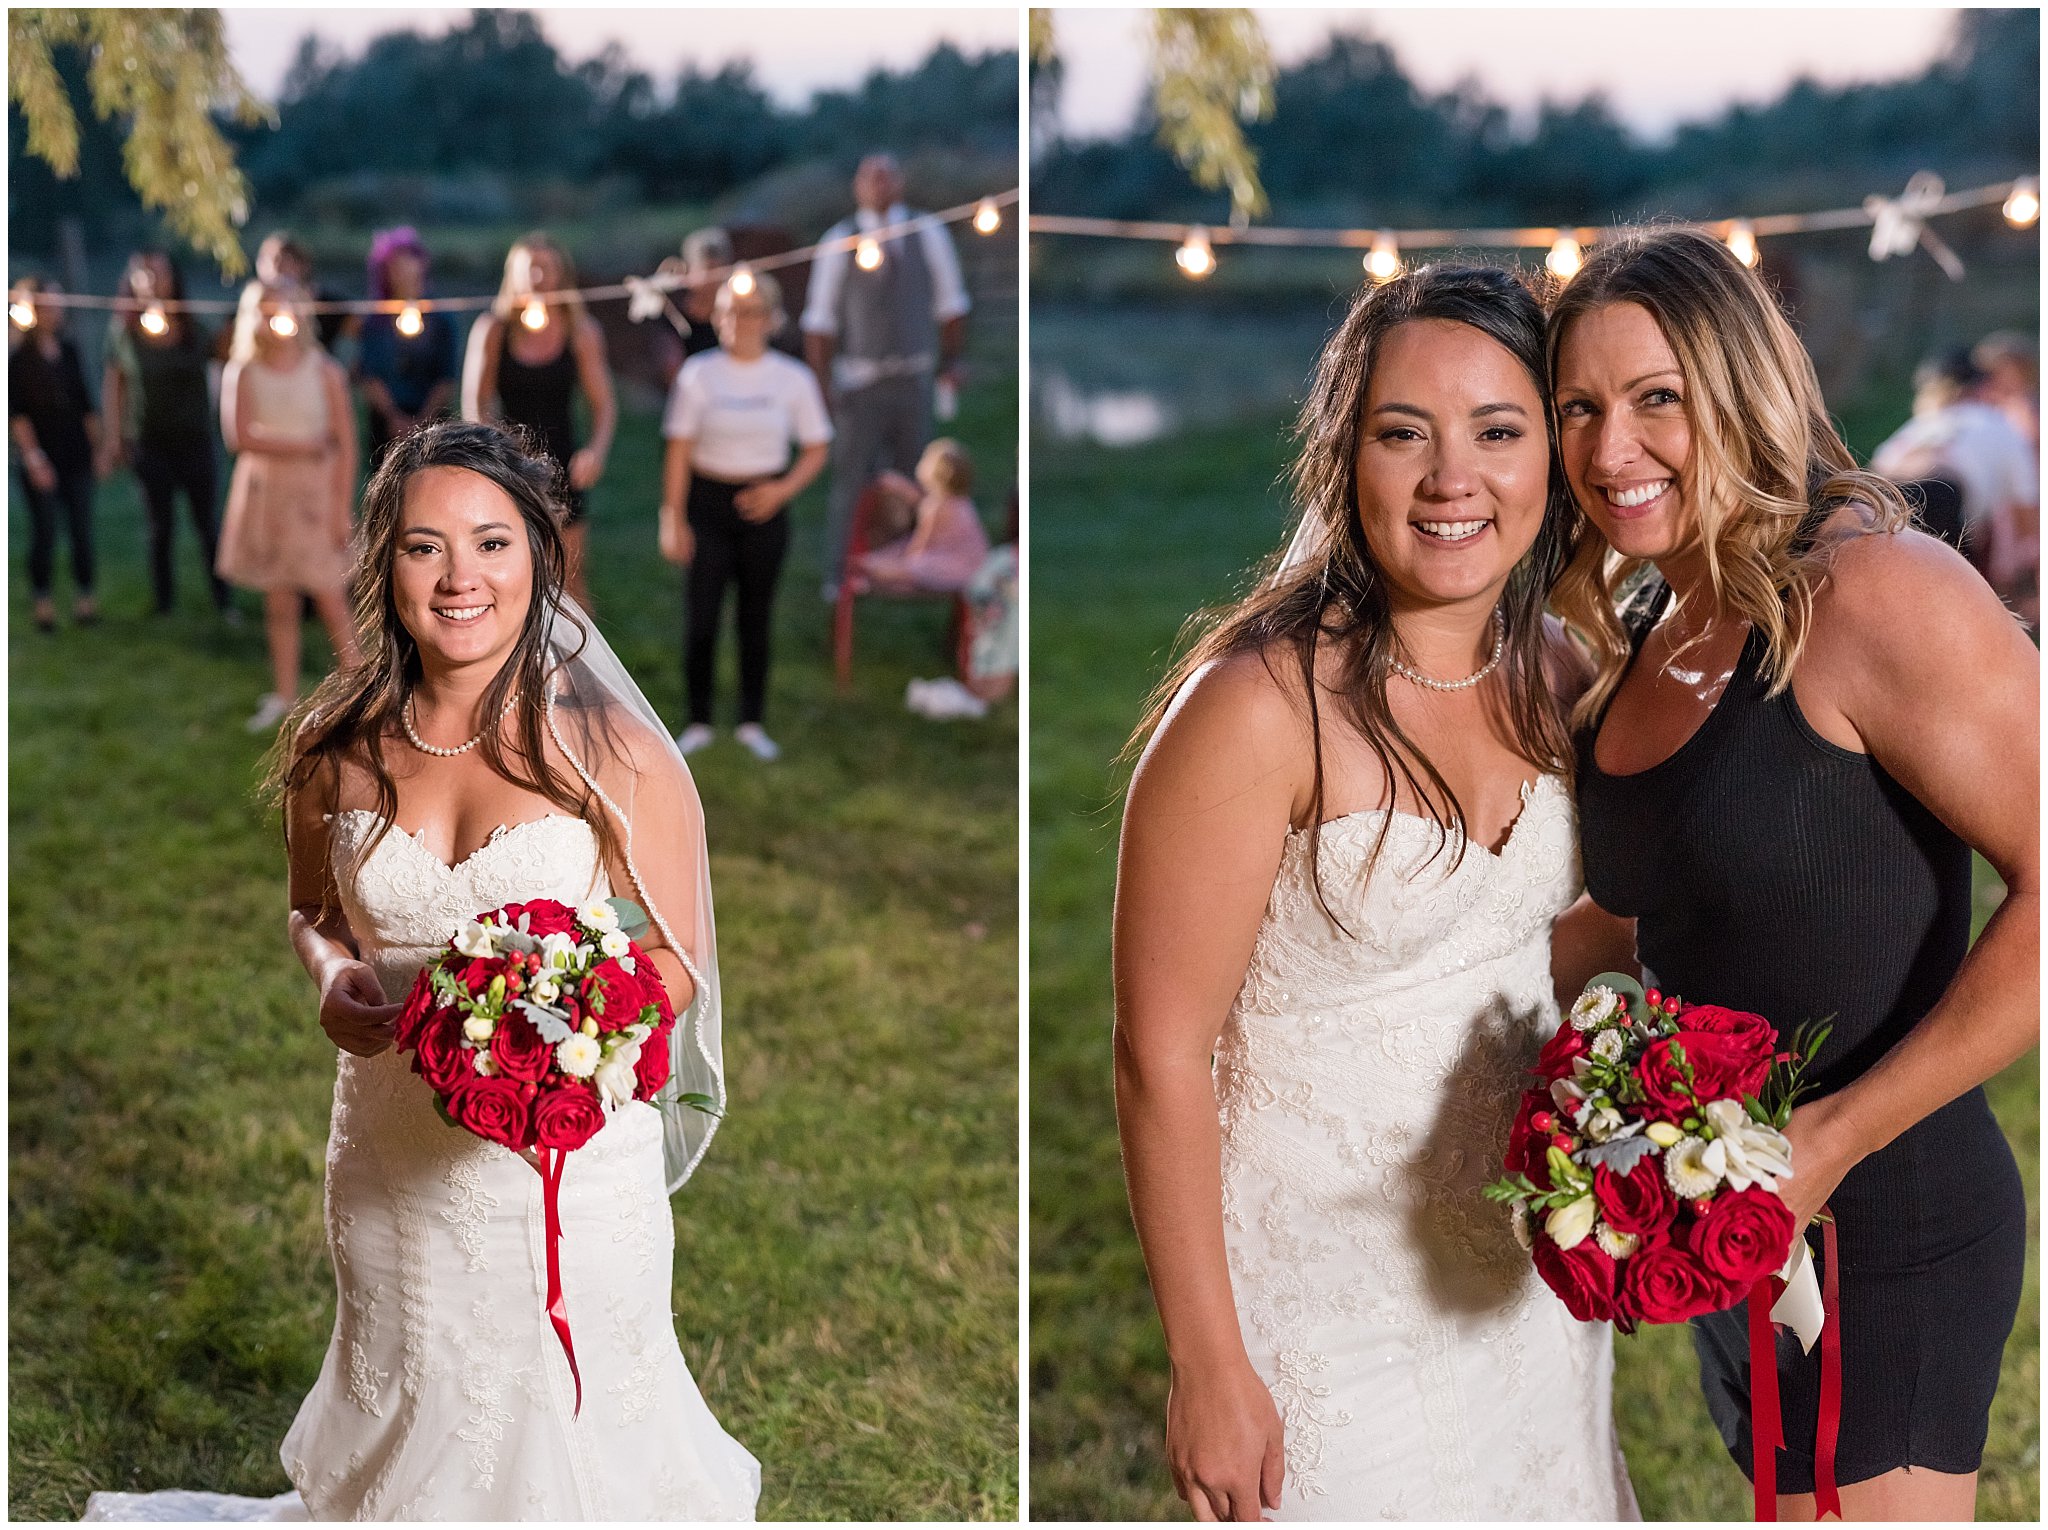 Bride getting ready to throw bouquet during bouquet toss | Red and Grey wedding | Davis County Outdoor Wedding | Jessie and Dallin Photography